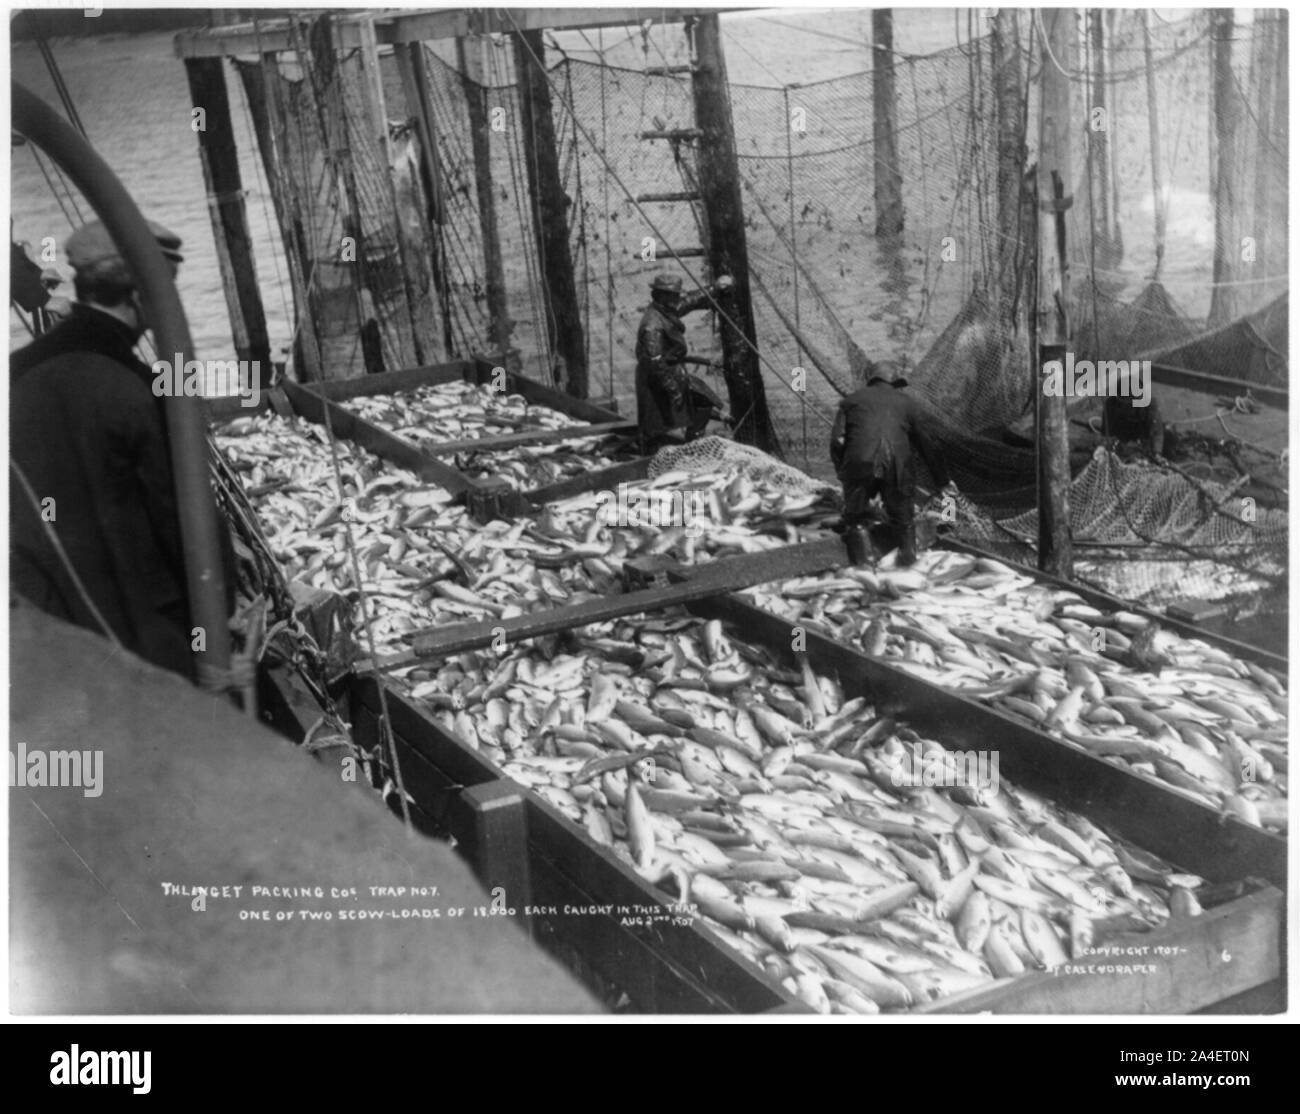 Thlinget Packing Co. trap no. 7, Aug. 2, 1907: One of two scow-loads of 18,000 [salmon] each caught in trap Stock Photo